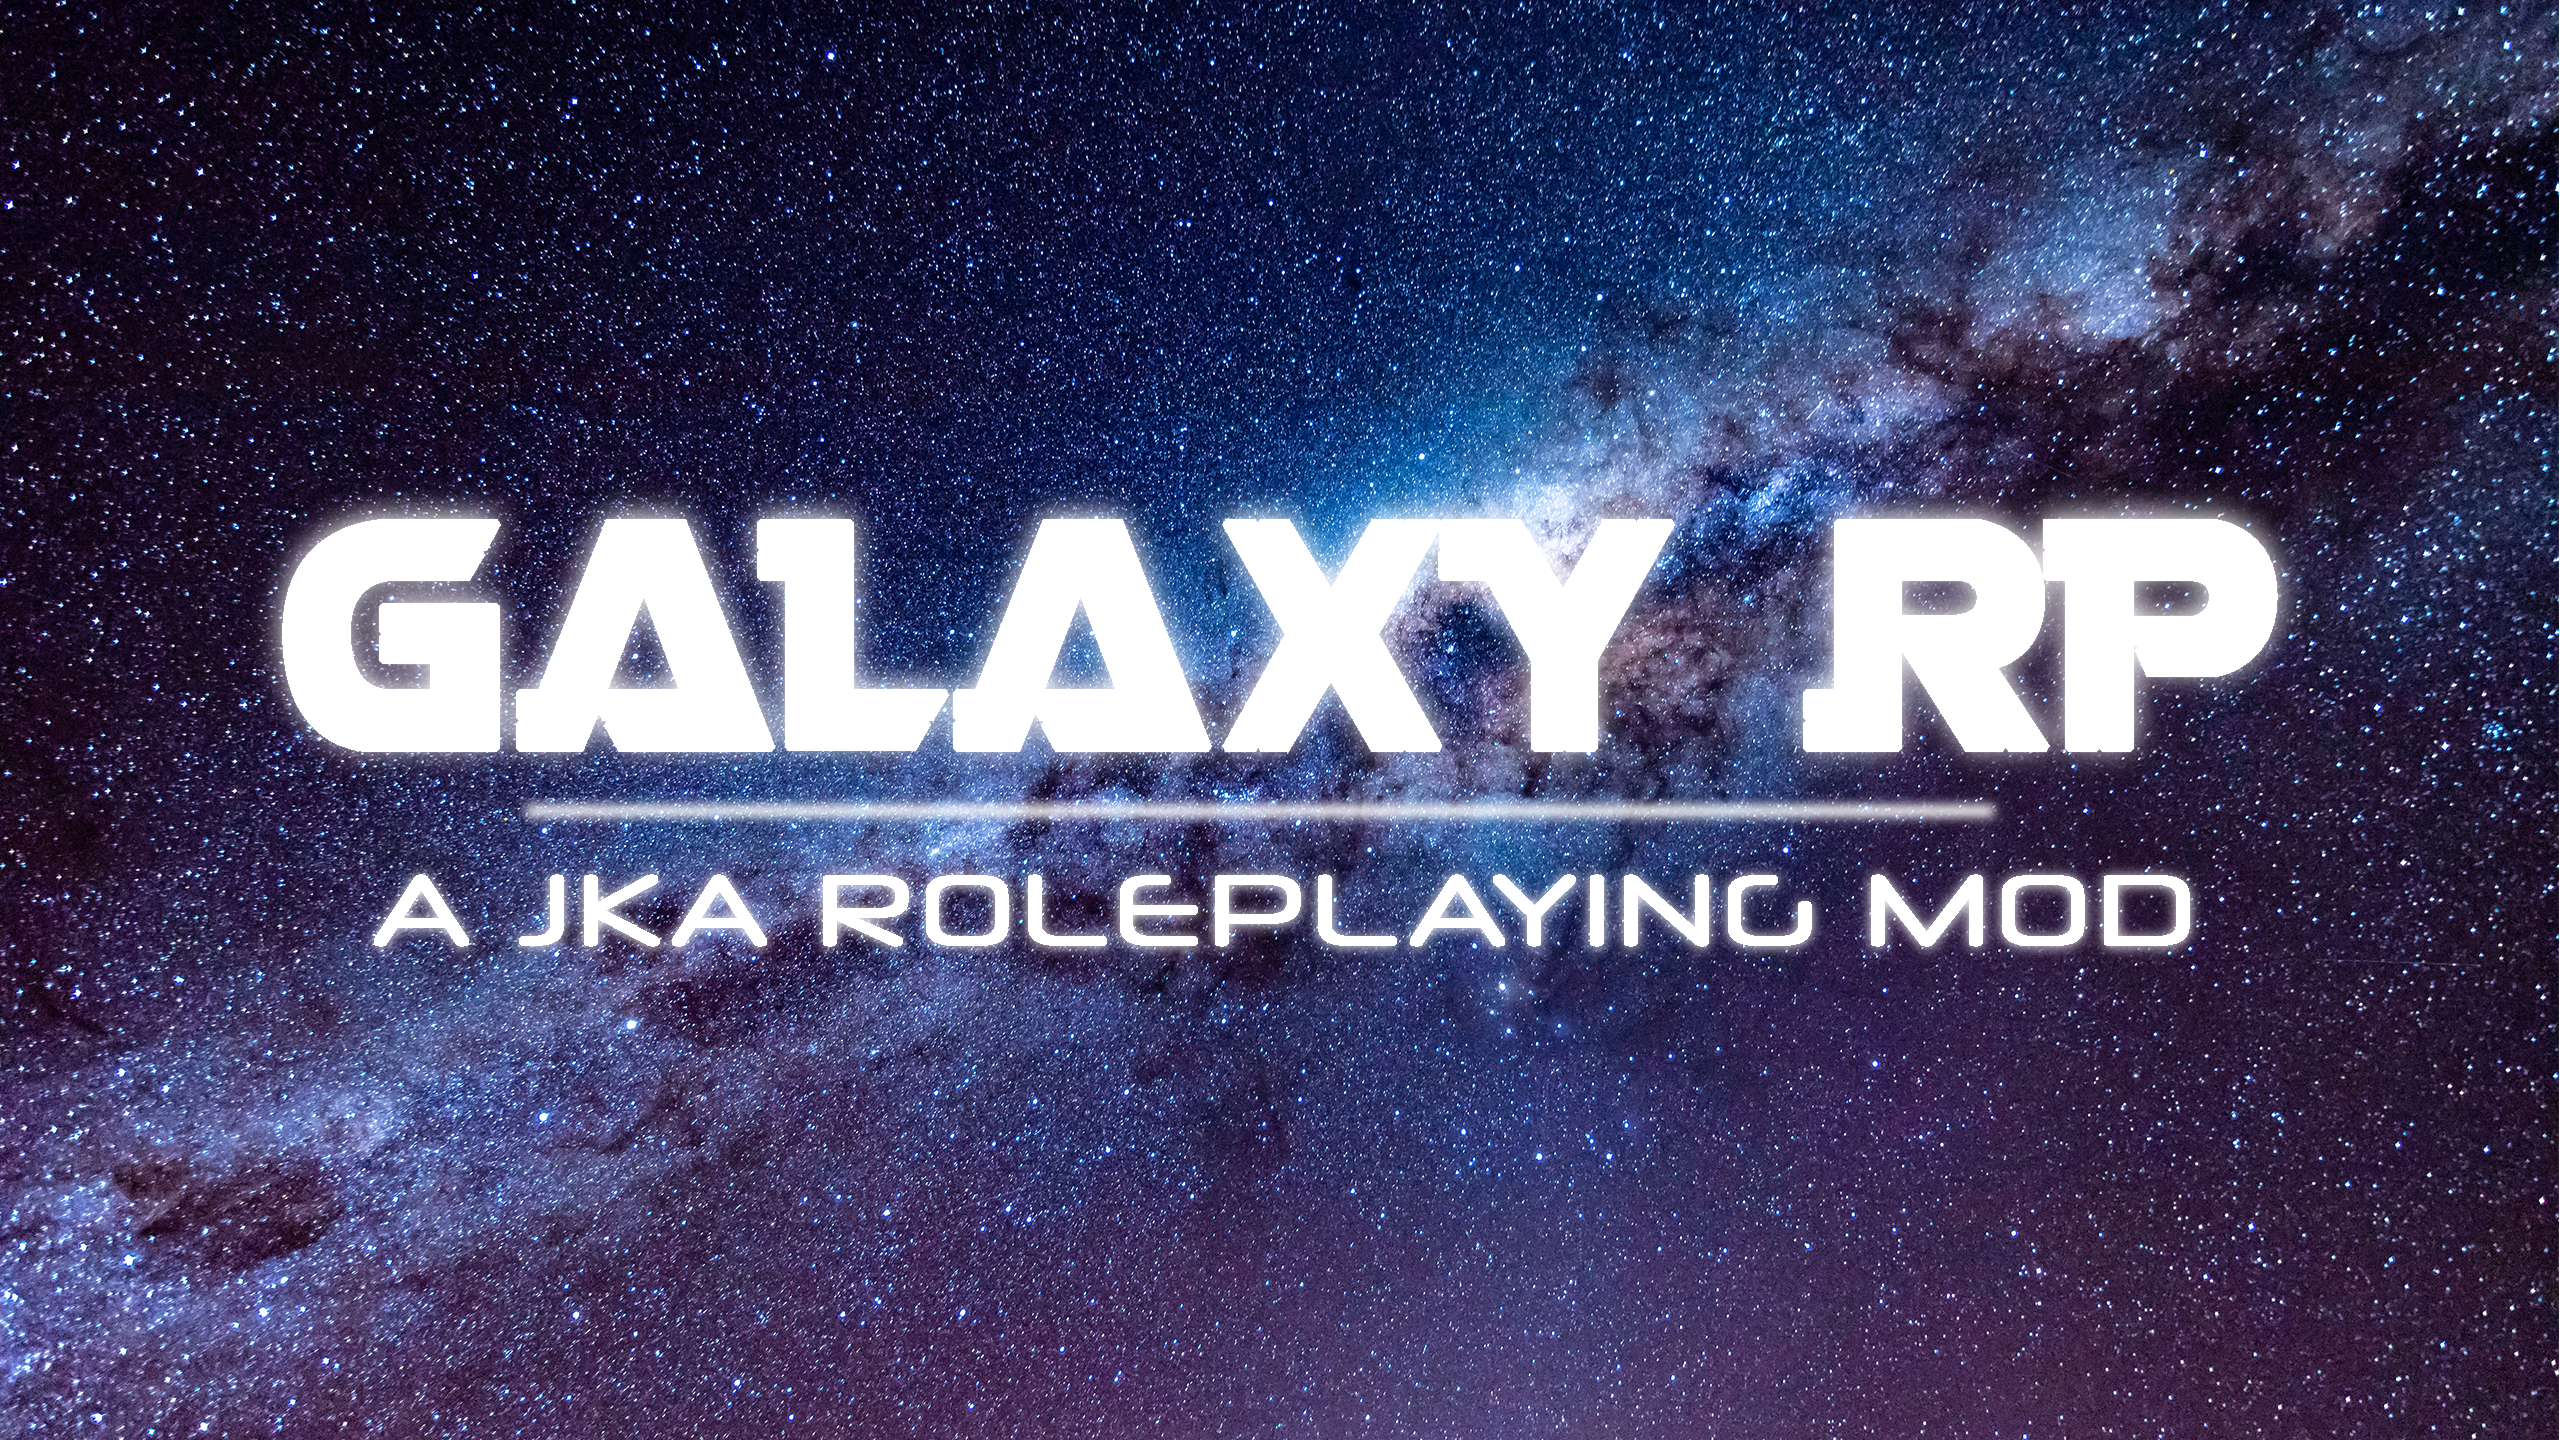 More information about "GalaxyRP"